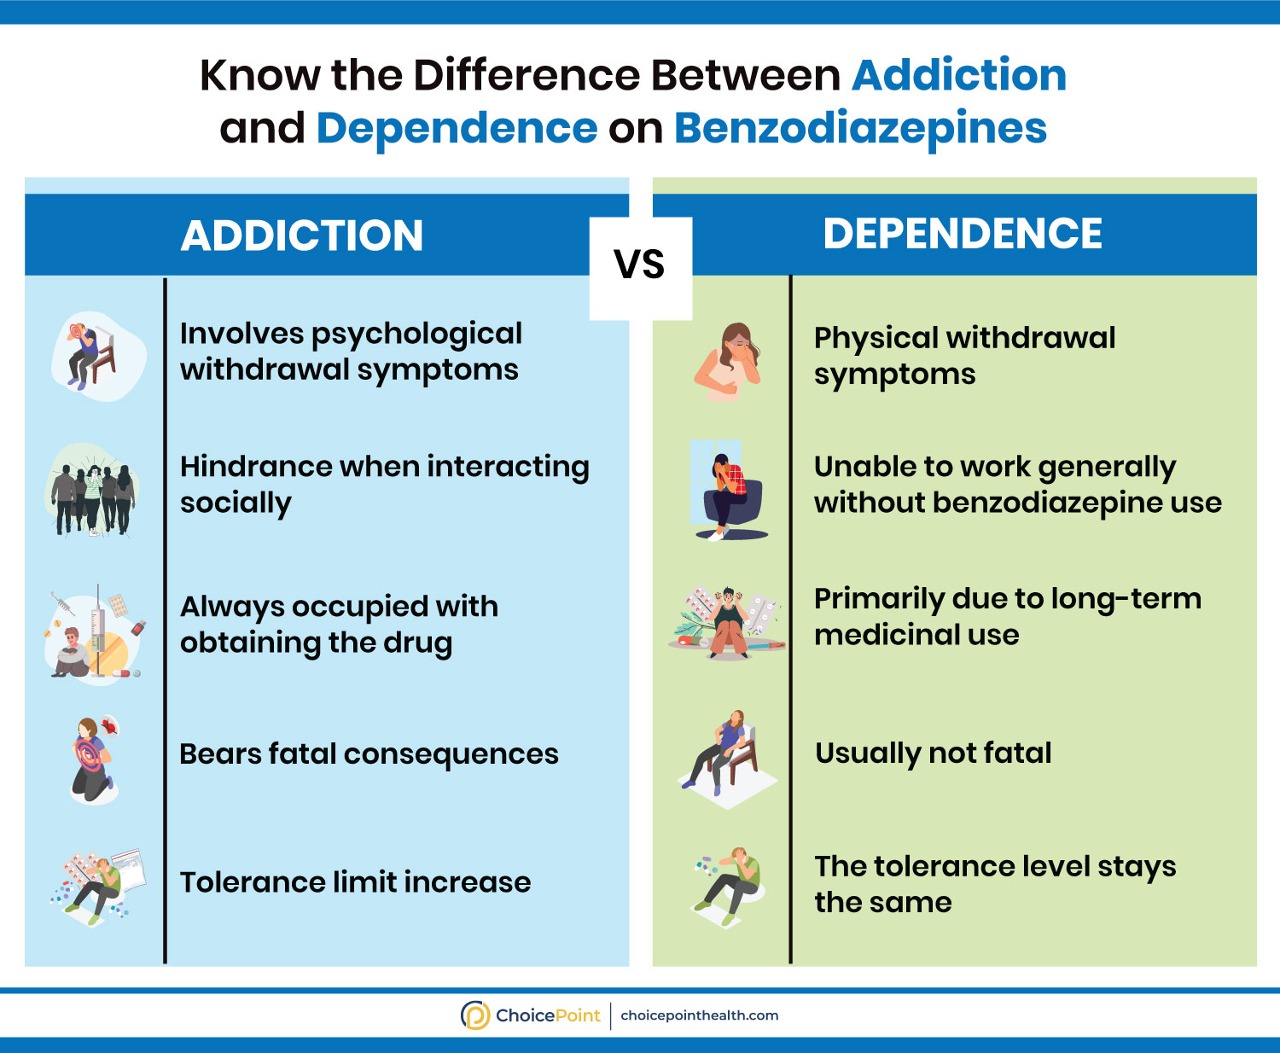 Addiction vs Physical Dependence